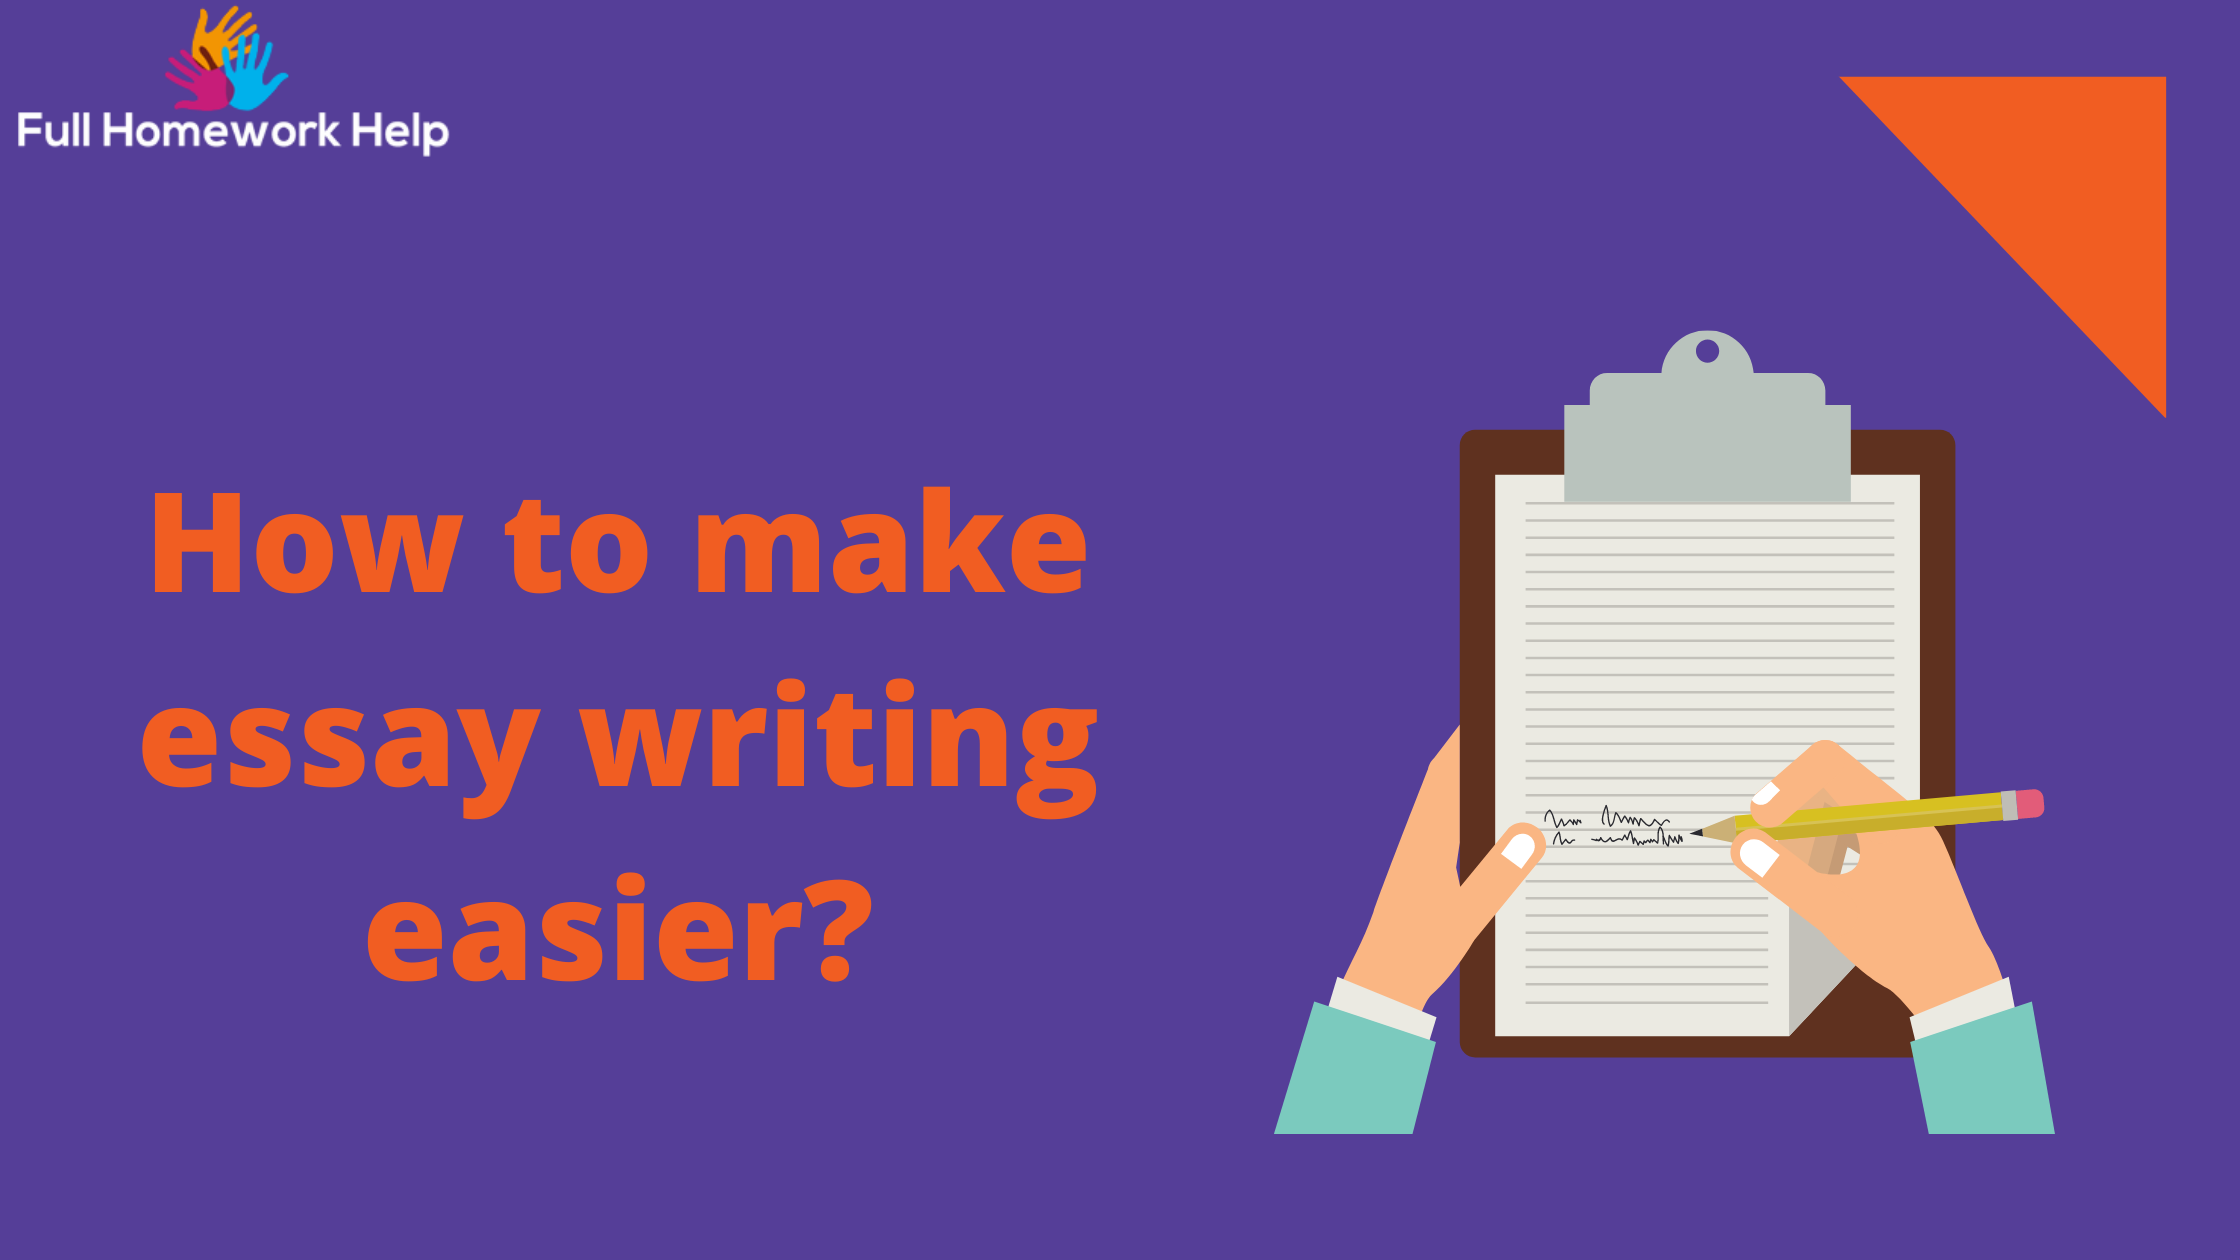 How to make essay writing easier